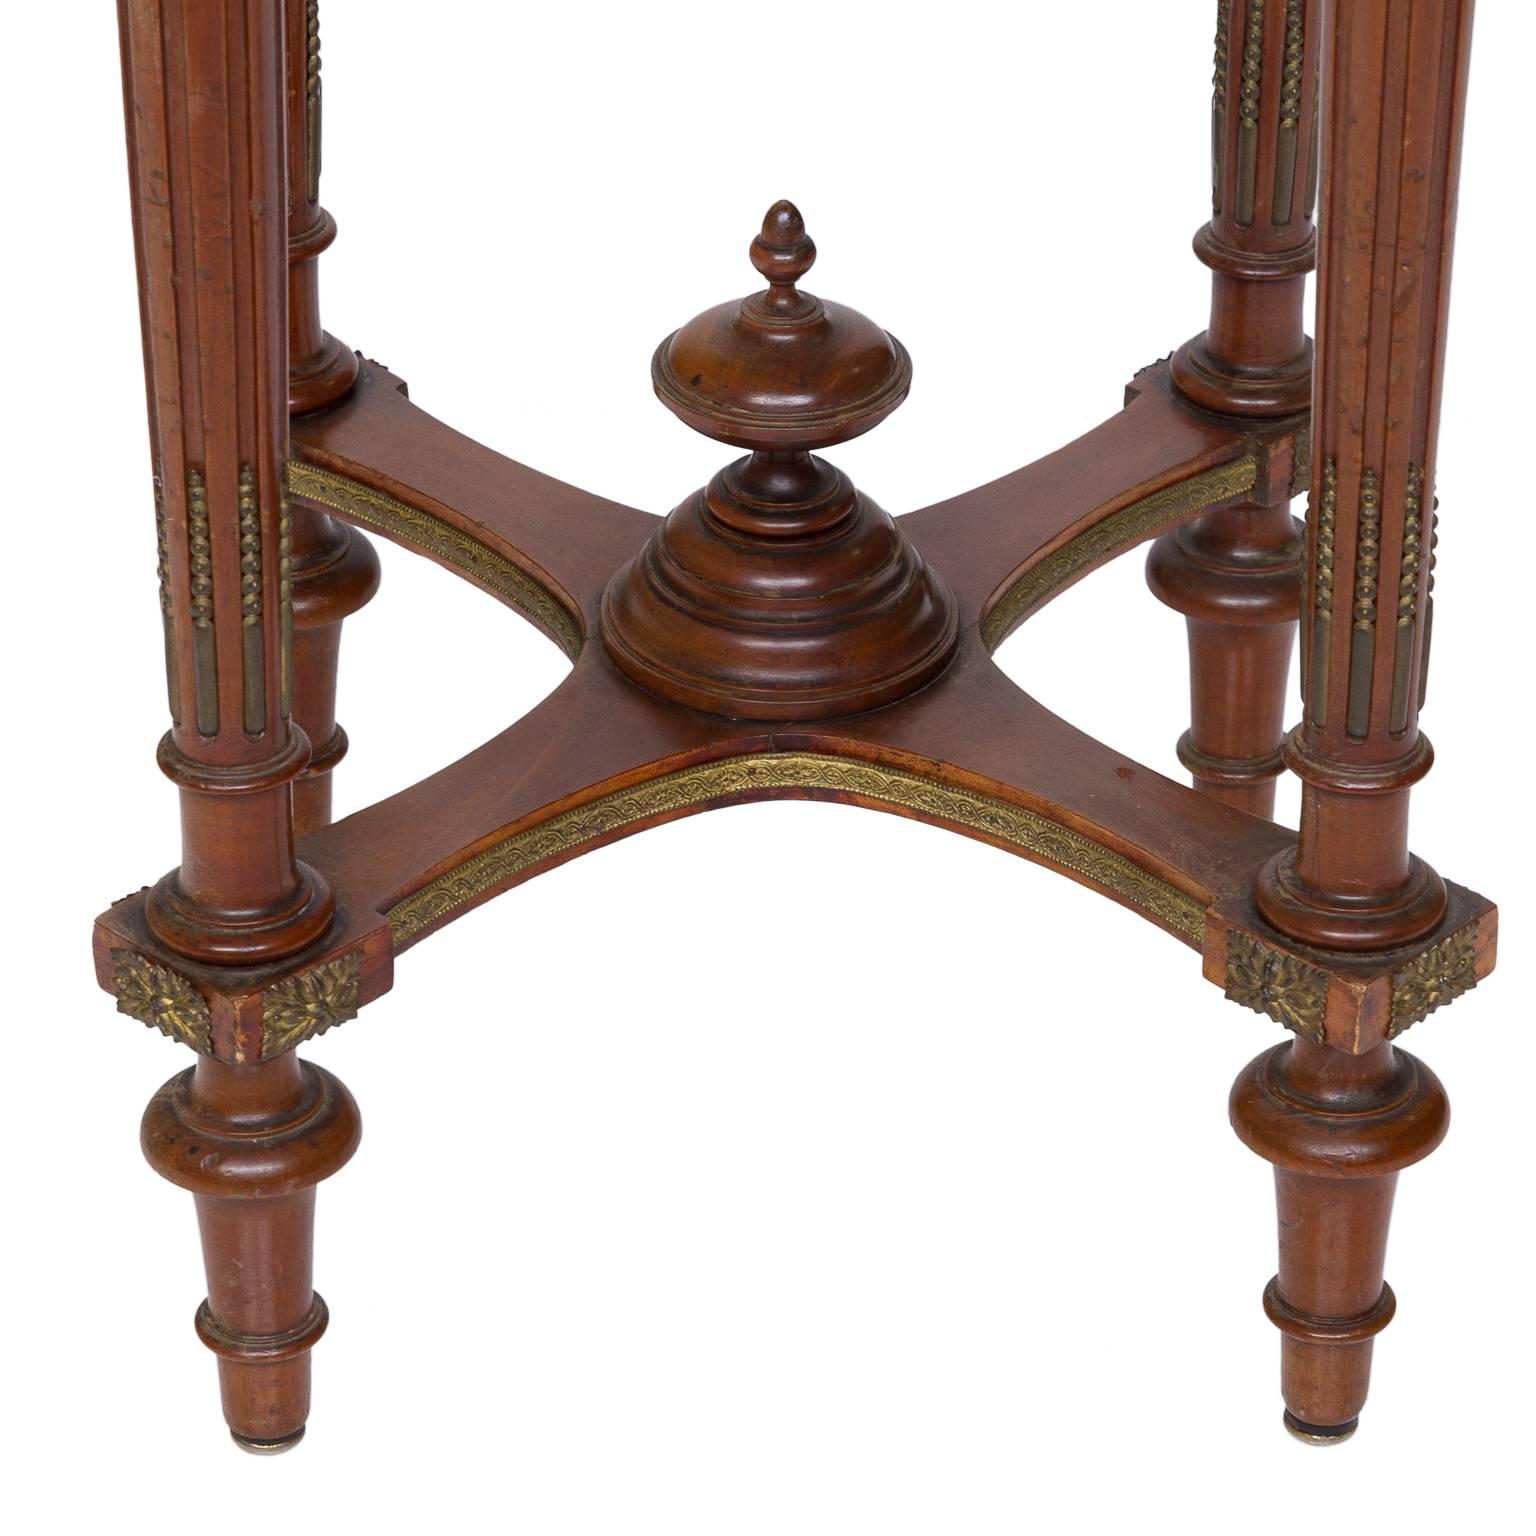 This side table is adorned with several ormolu accents, including the laurel leaf wrapped fascia molding on the apron and the swags on the tops of the legs. The tapered legs are fluted with a bead and cable inset. Decorative bronze moulding